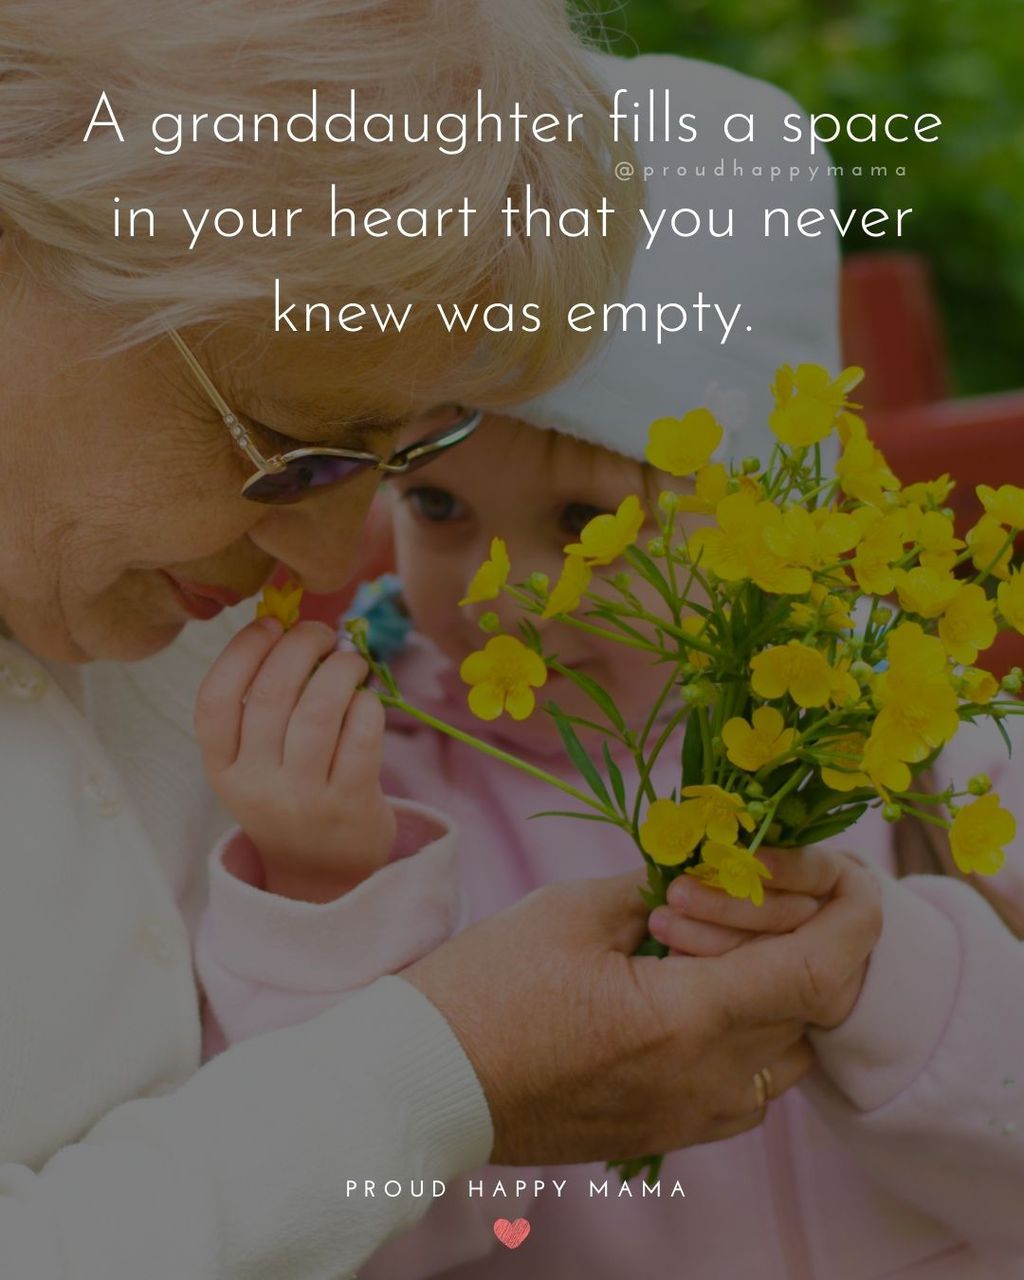 Granddaughter Quotes - A granddaughter fills a space in your heart that you never knew was empty.